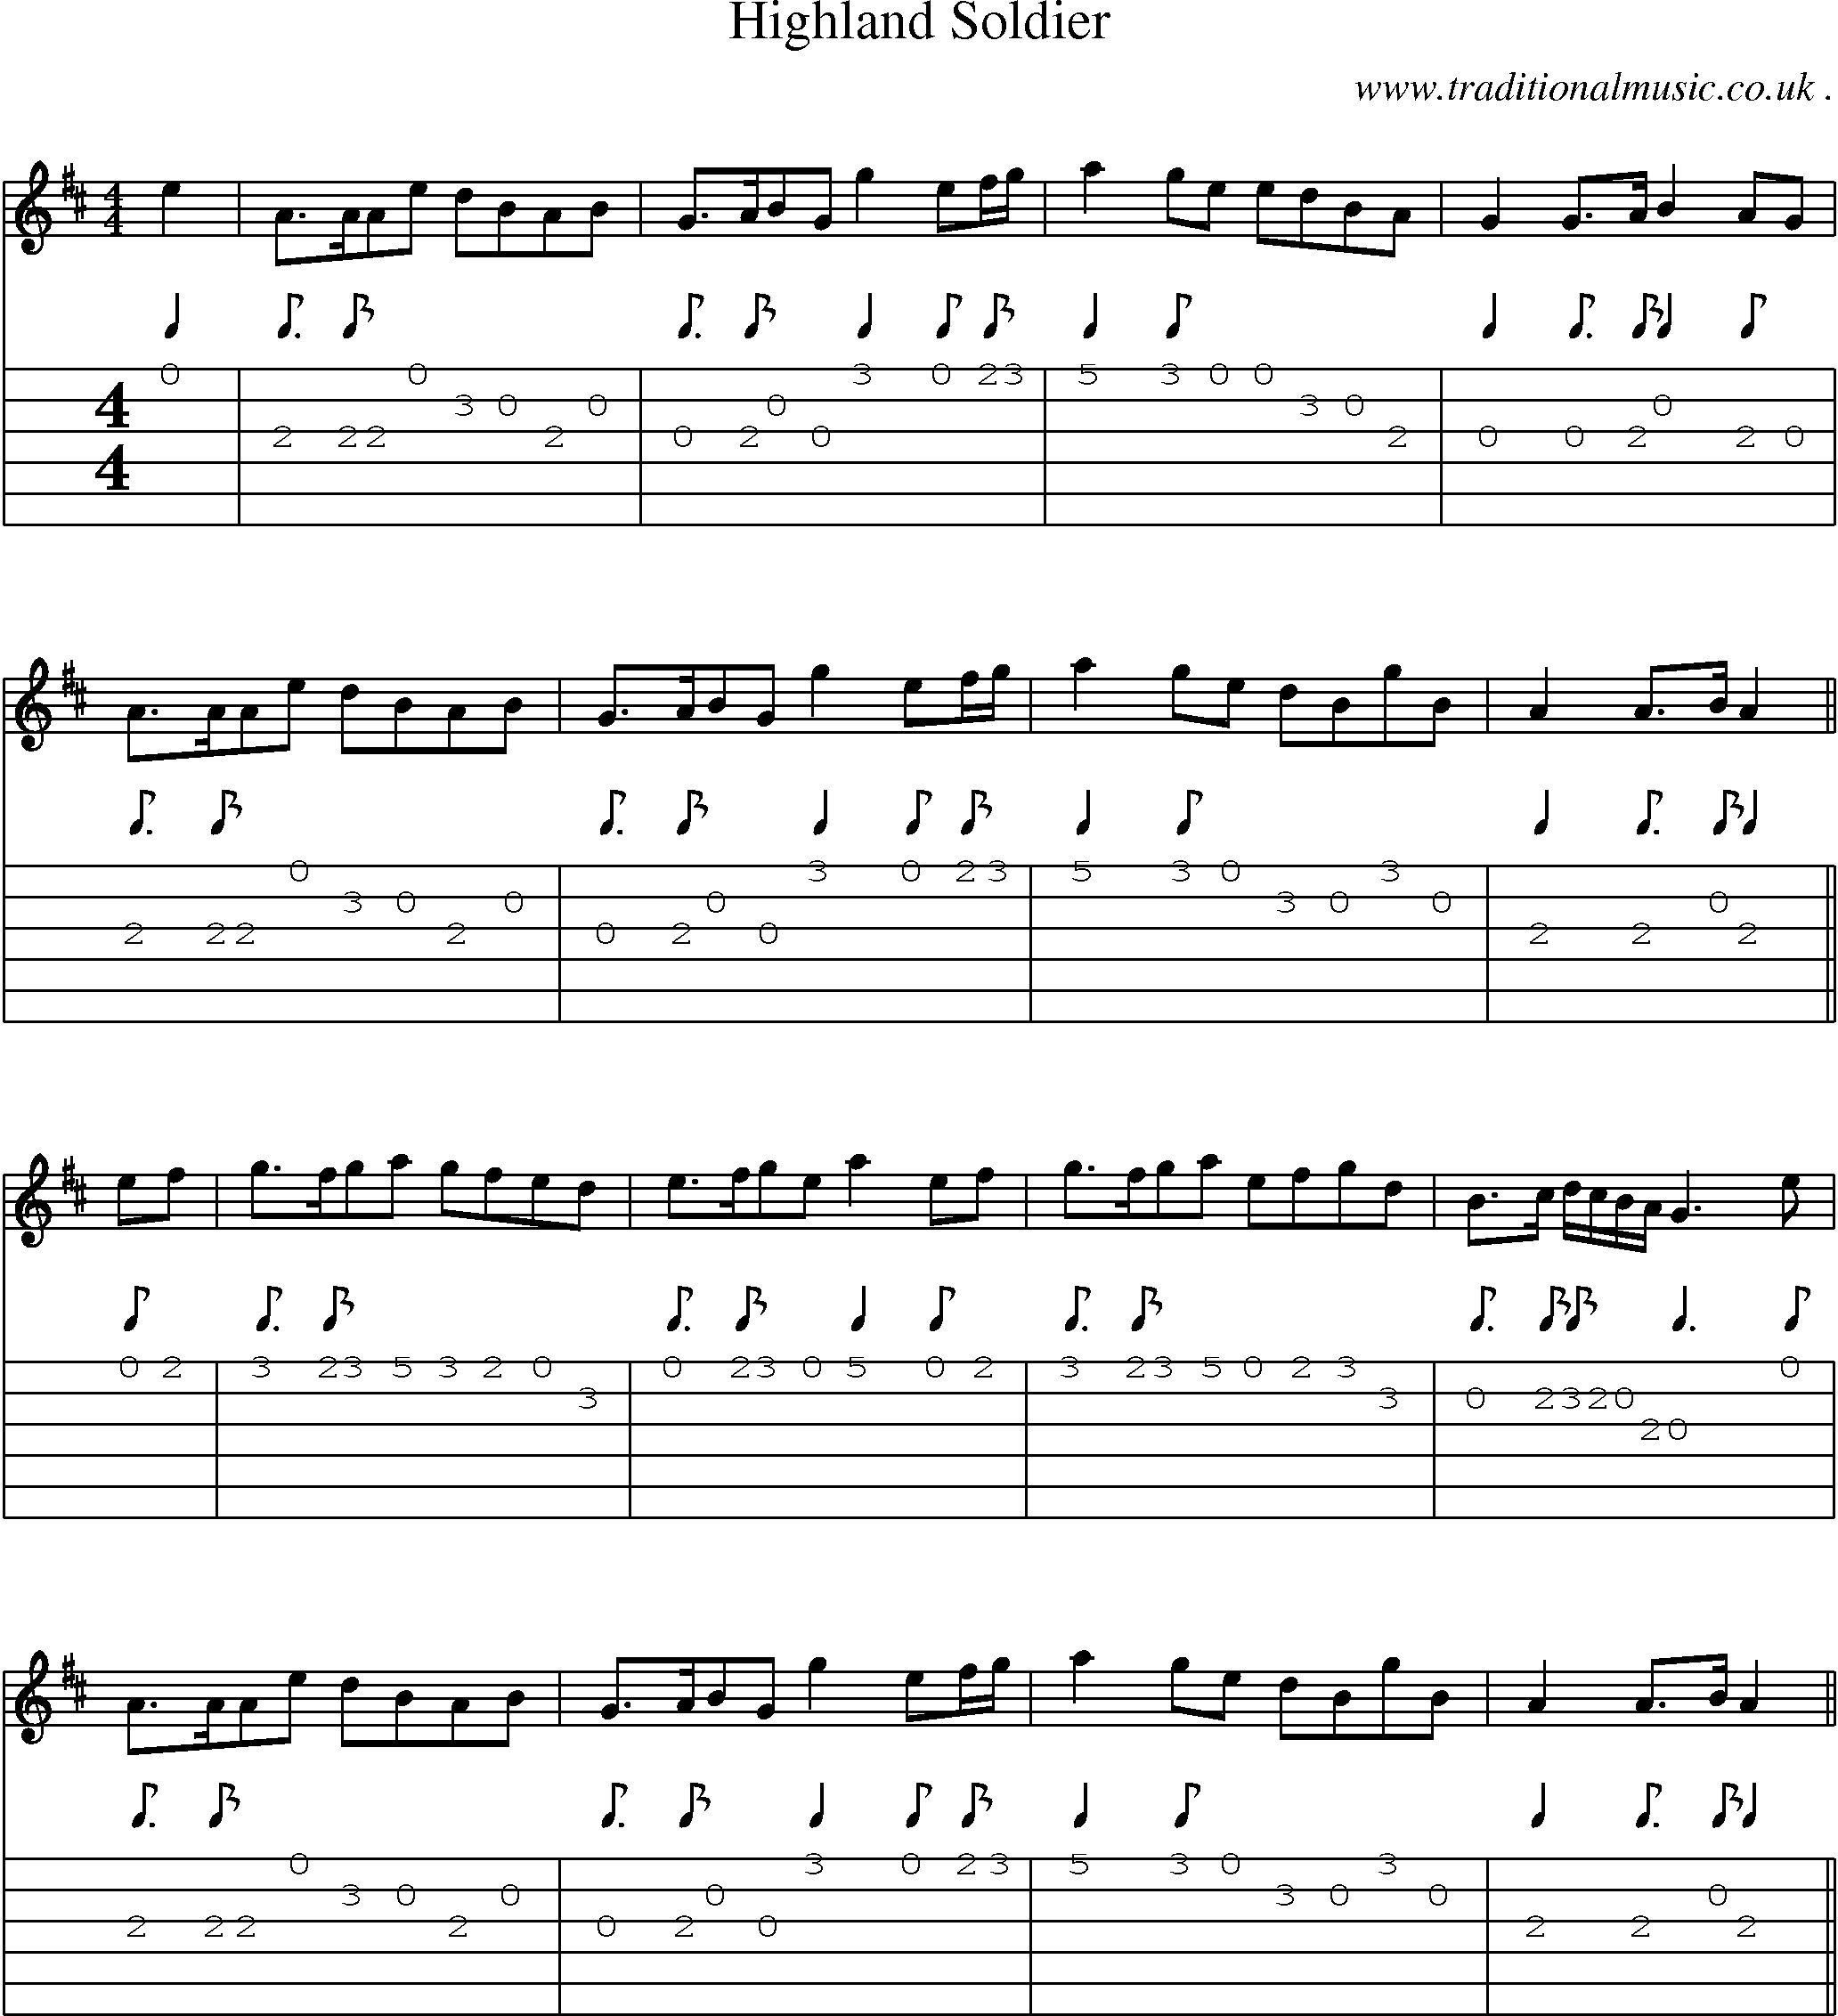 Sheet-music  score, Chords and Guitar Tabs for Highland Soldier